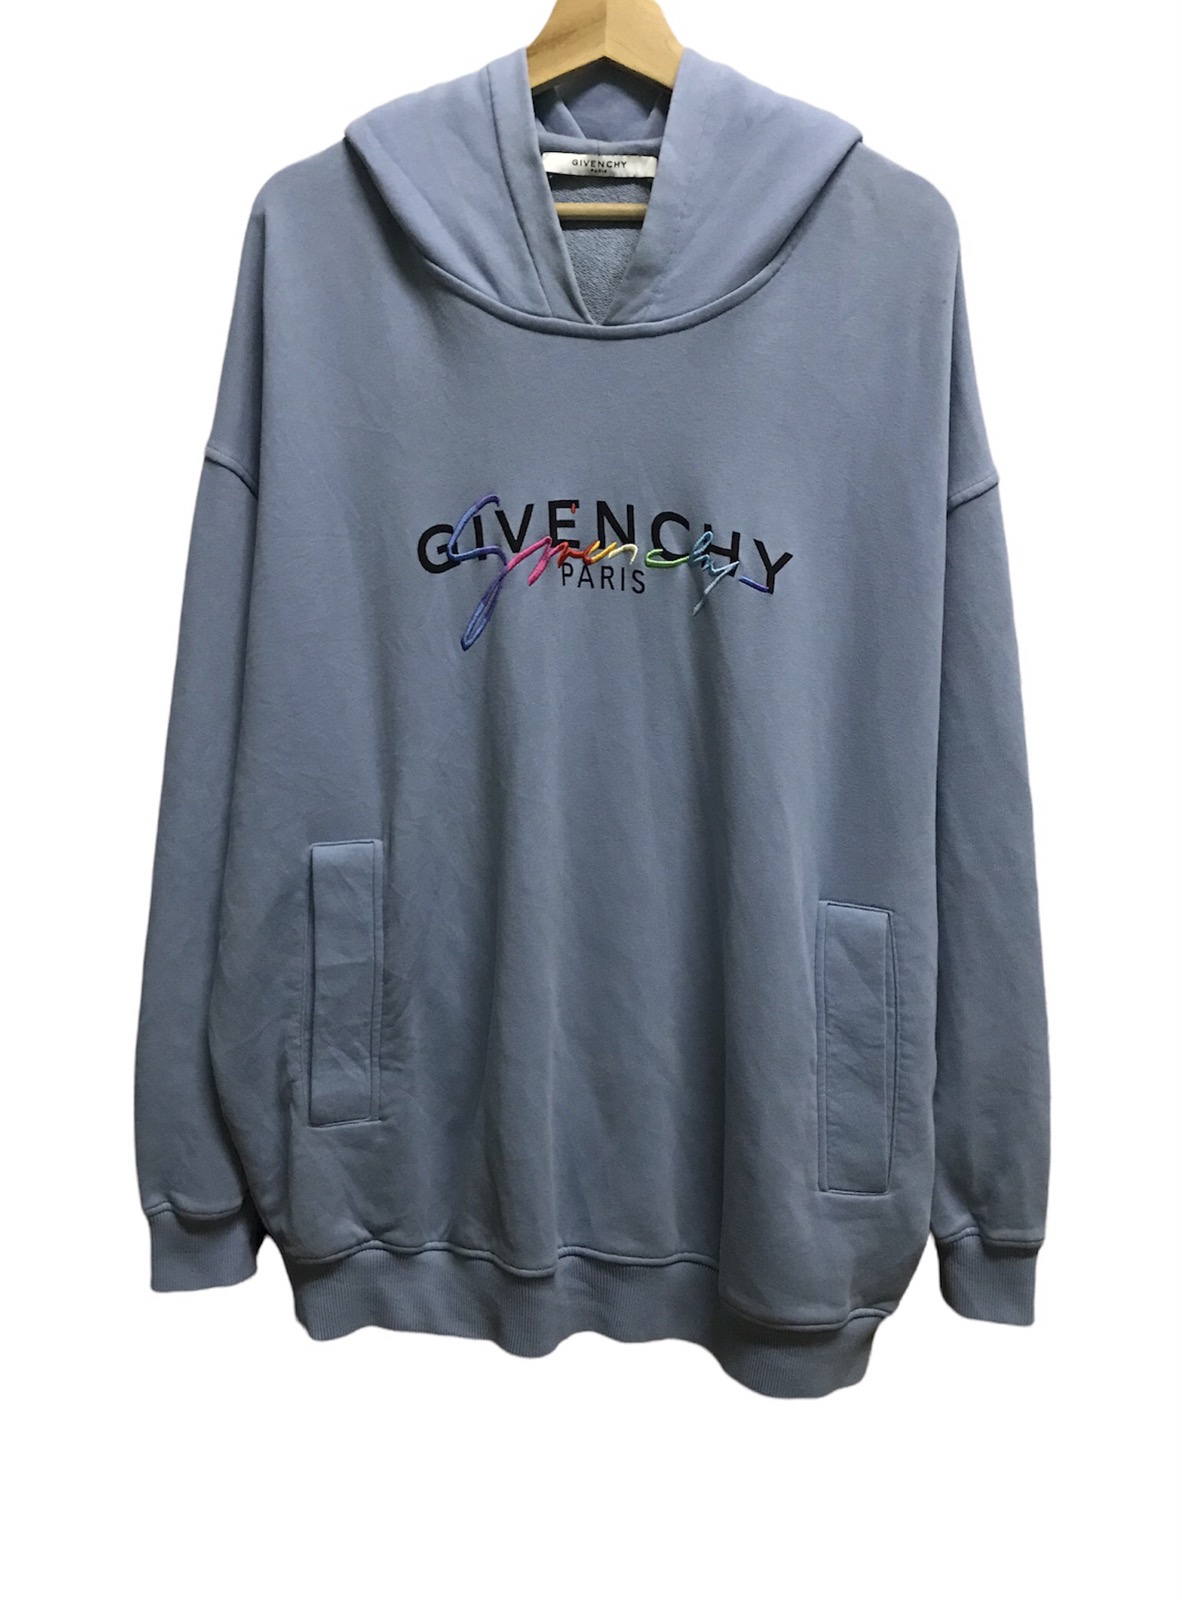 OVERSIZED GIVENCHY SIGNATURE HOODIE - 1